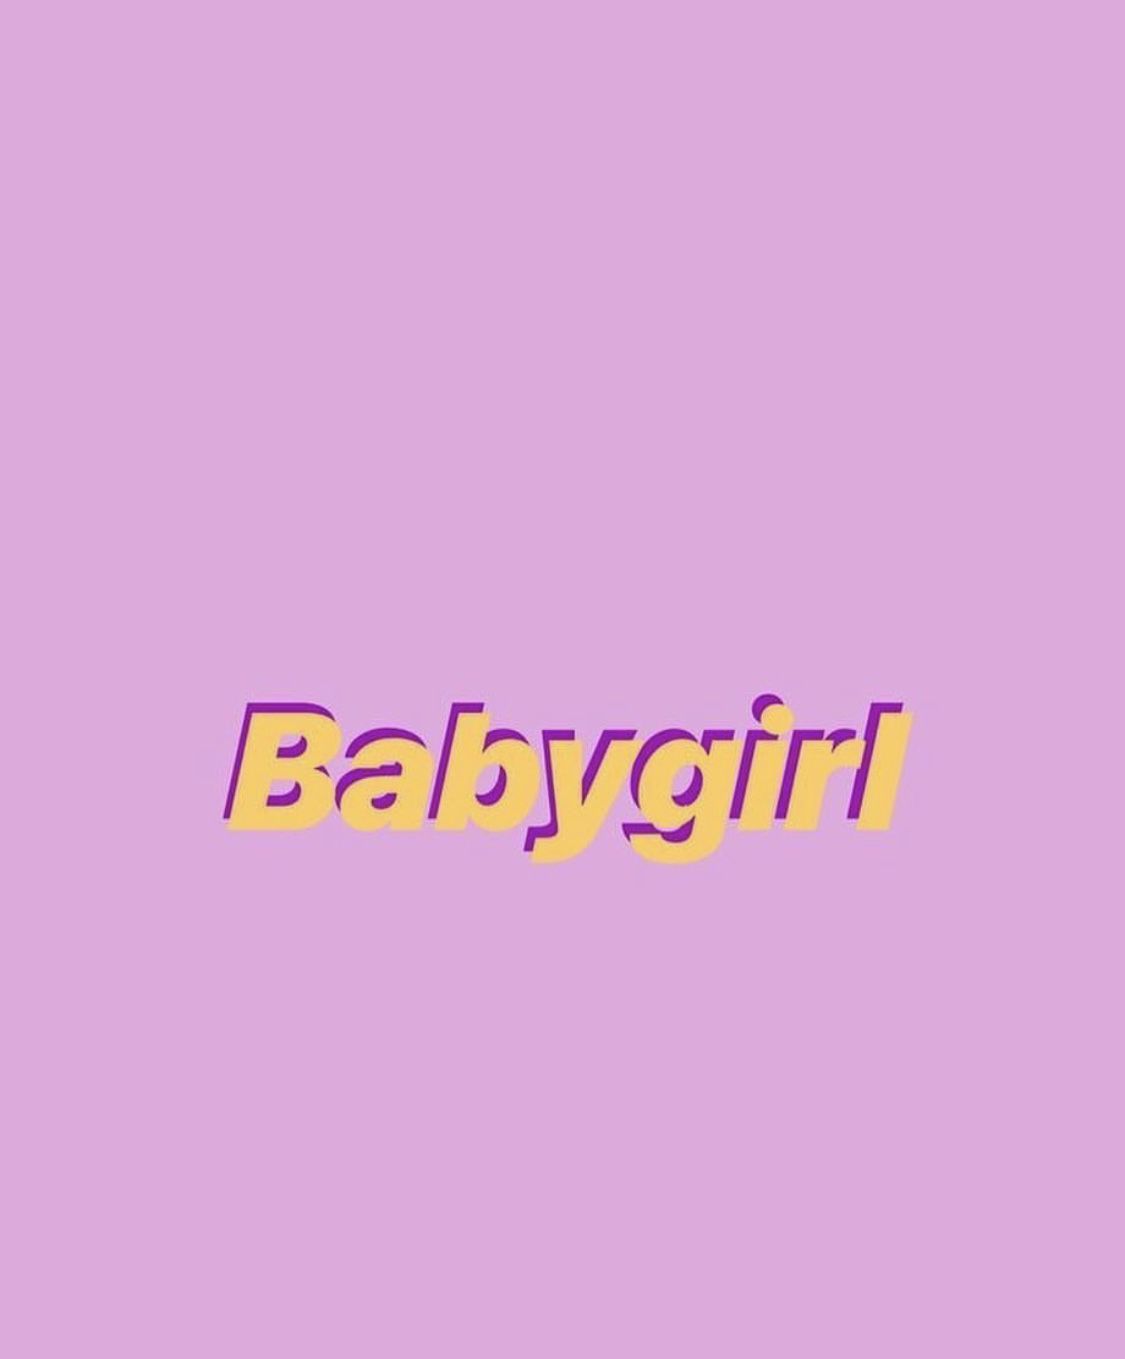 Baby girl wallpaper, Baby girl quotes, Colorful wallpaper